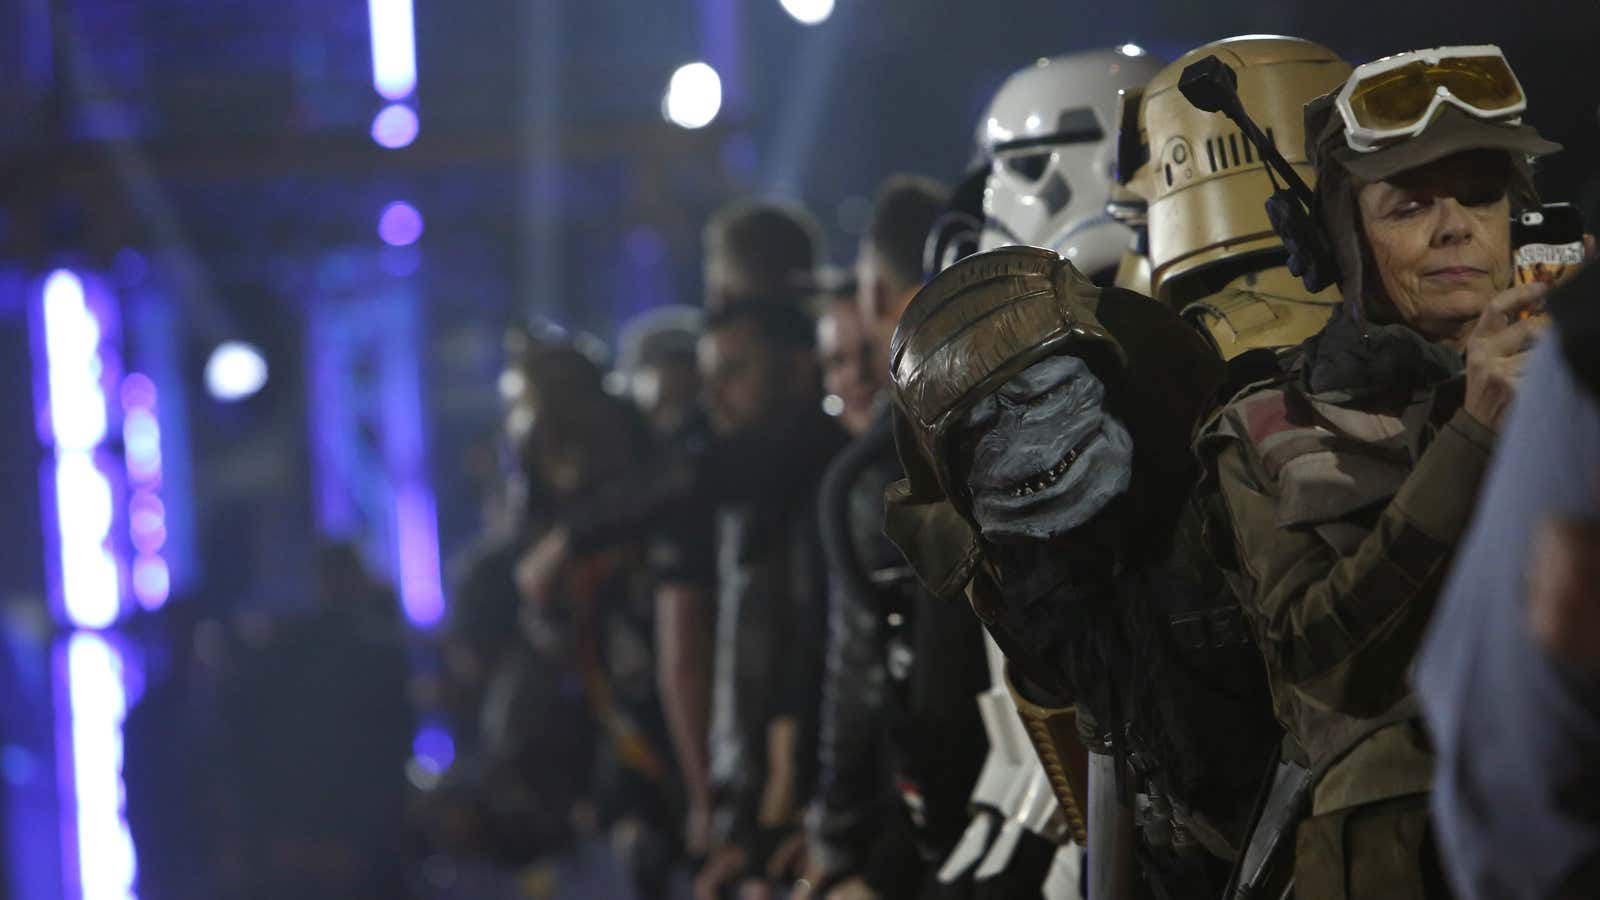 Audience members line up at the red carpet premiere of Rogue One: A Star Wars Story.